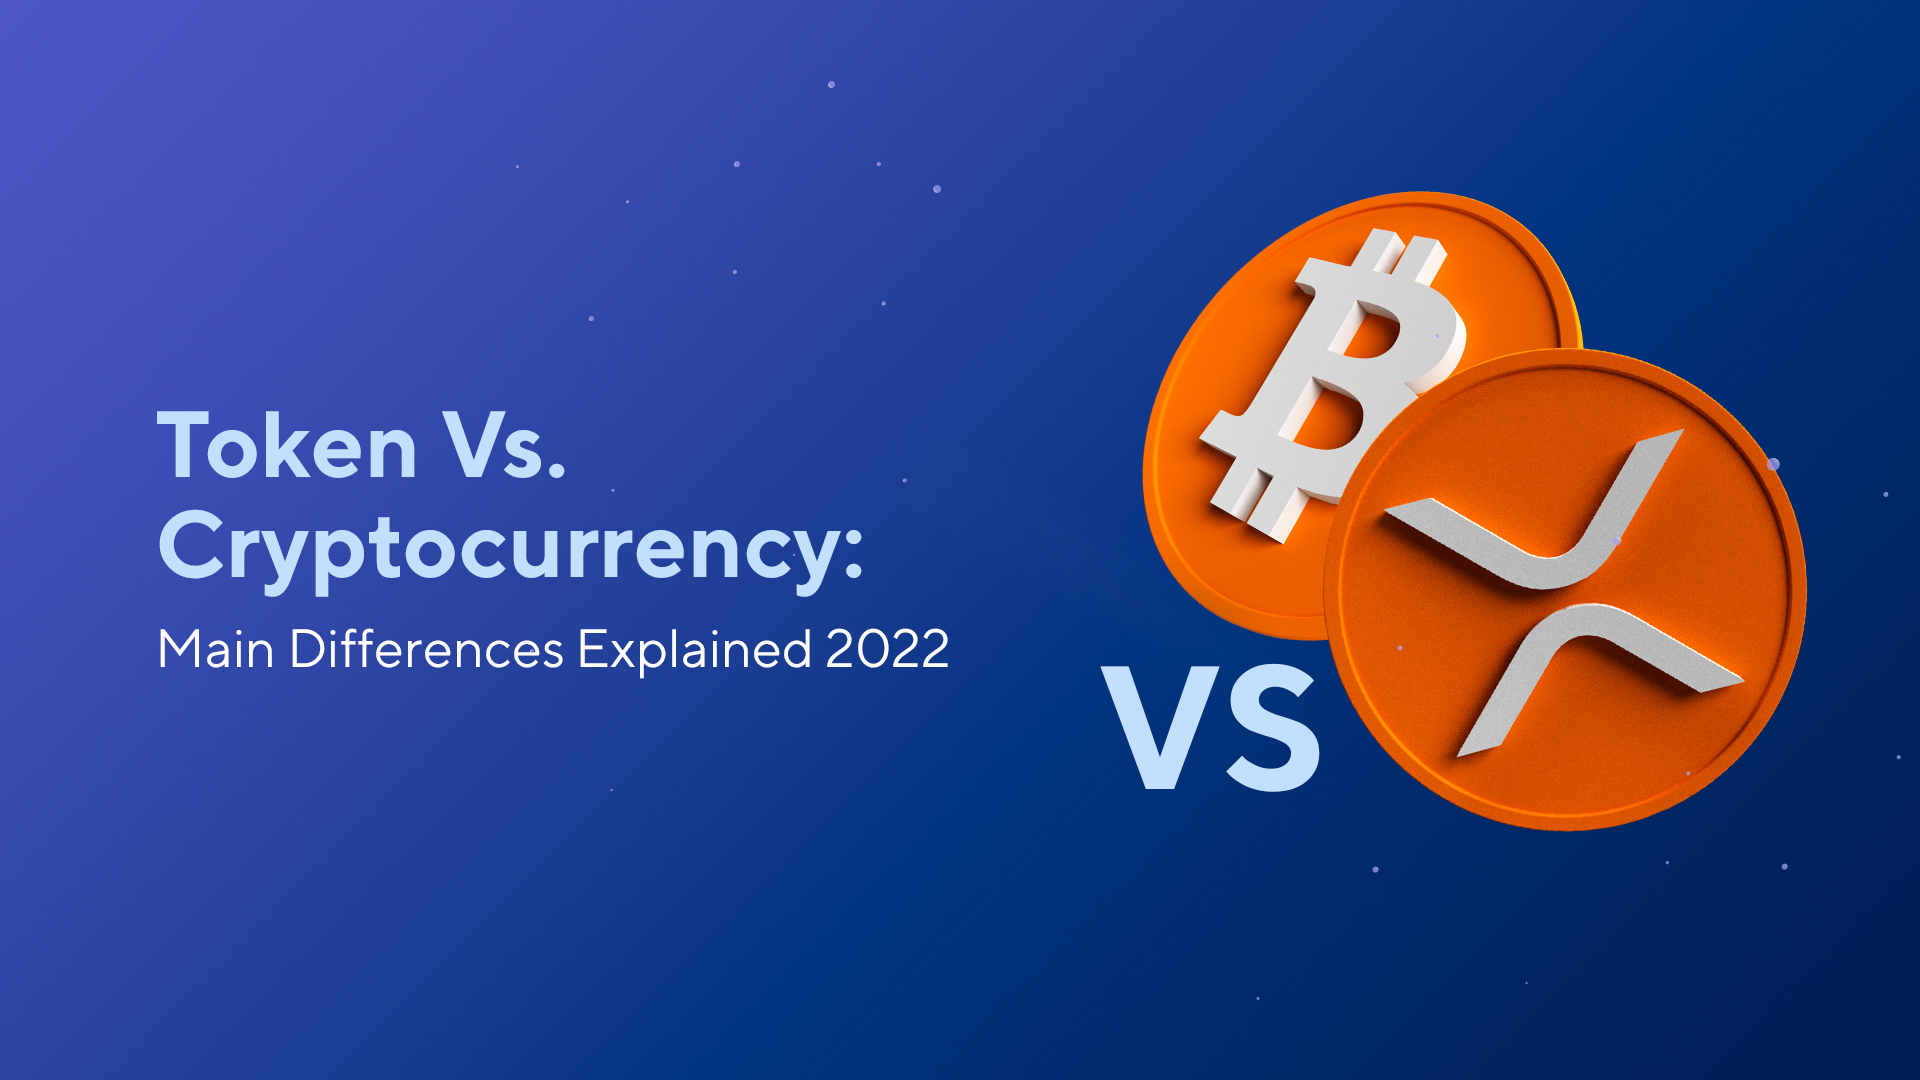 Token Vs. Cryptocurrency: Main Differences Explained 2022